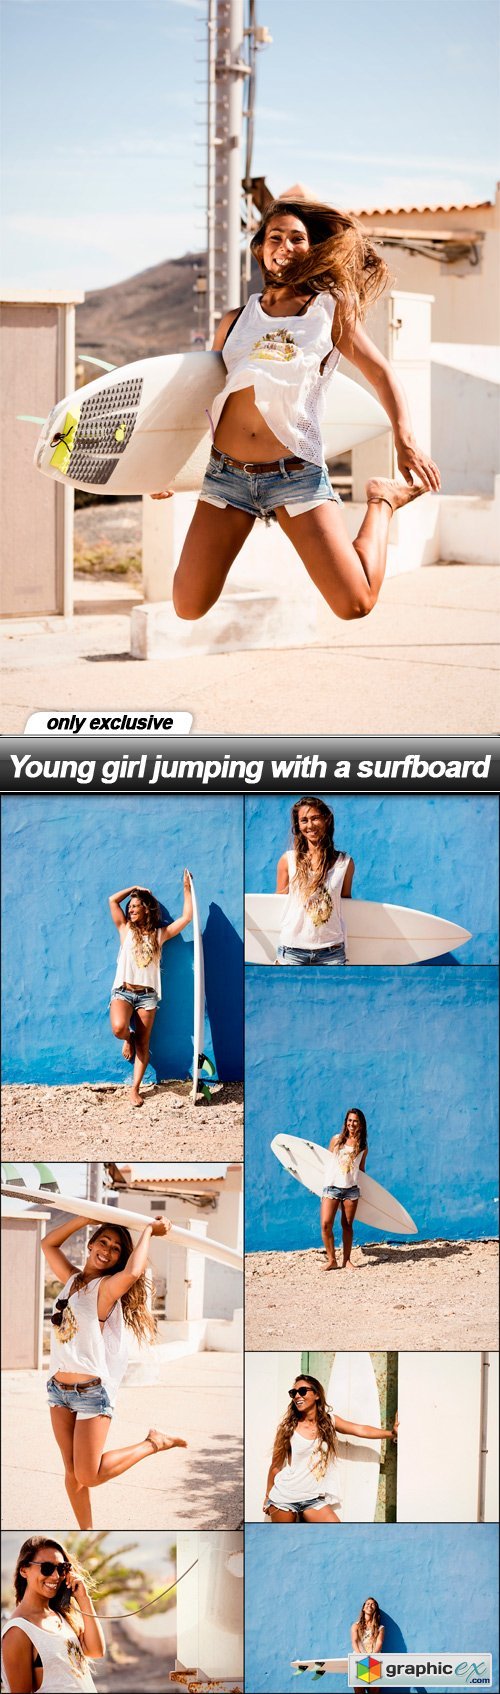 Young girl jumping with a surfboard - 8 UHQ JPEG